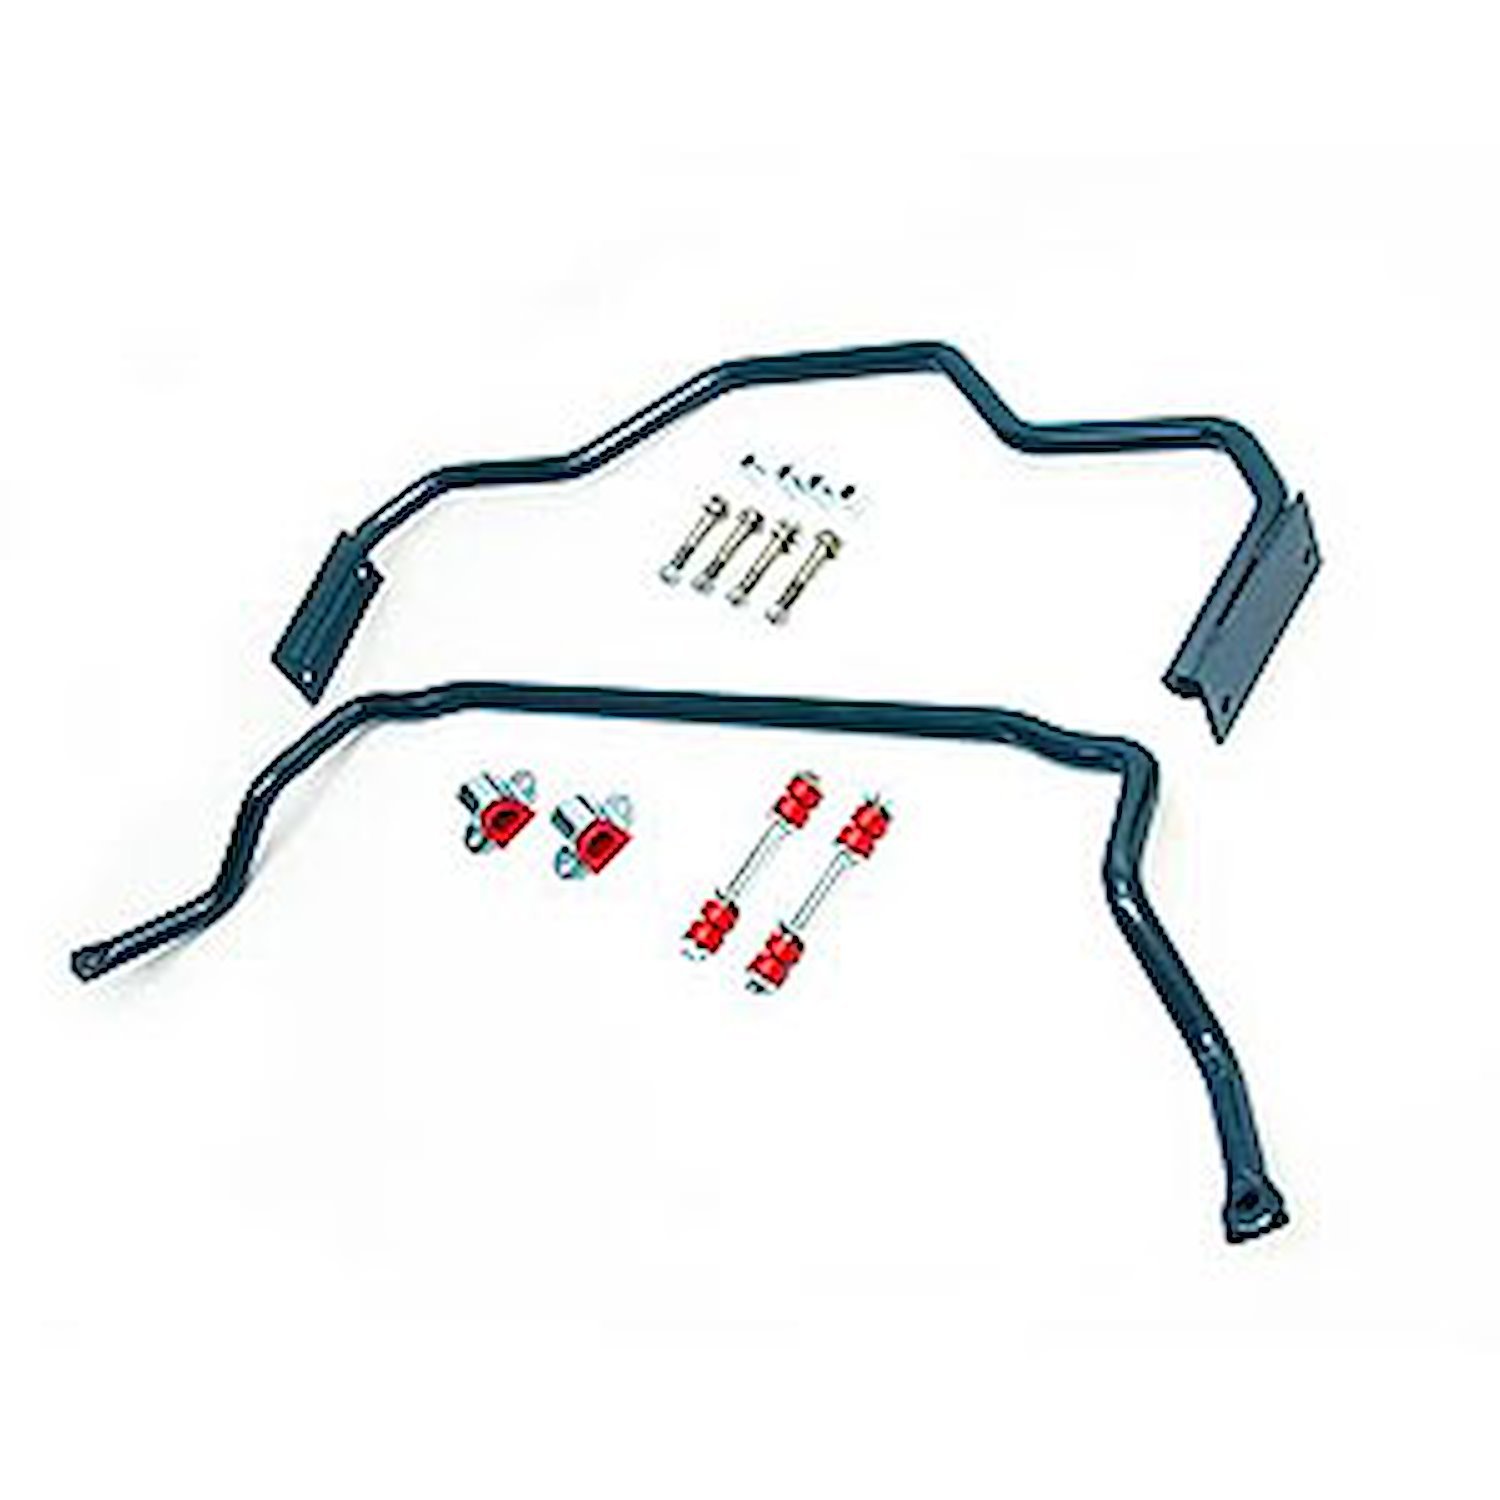 Front/Rear Sway Bar Kit for 1995-2004 GM S-Series